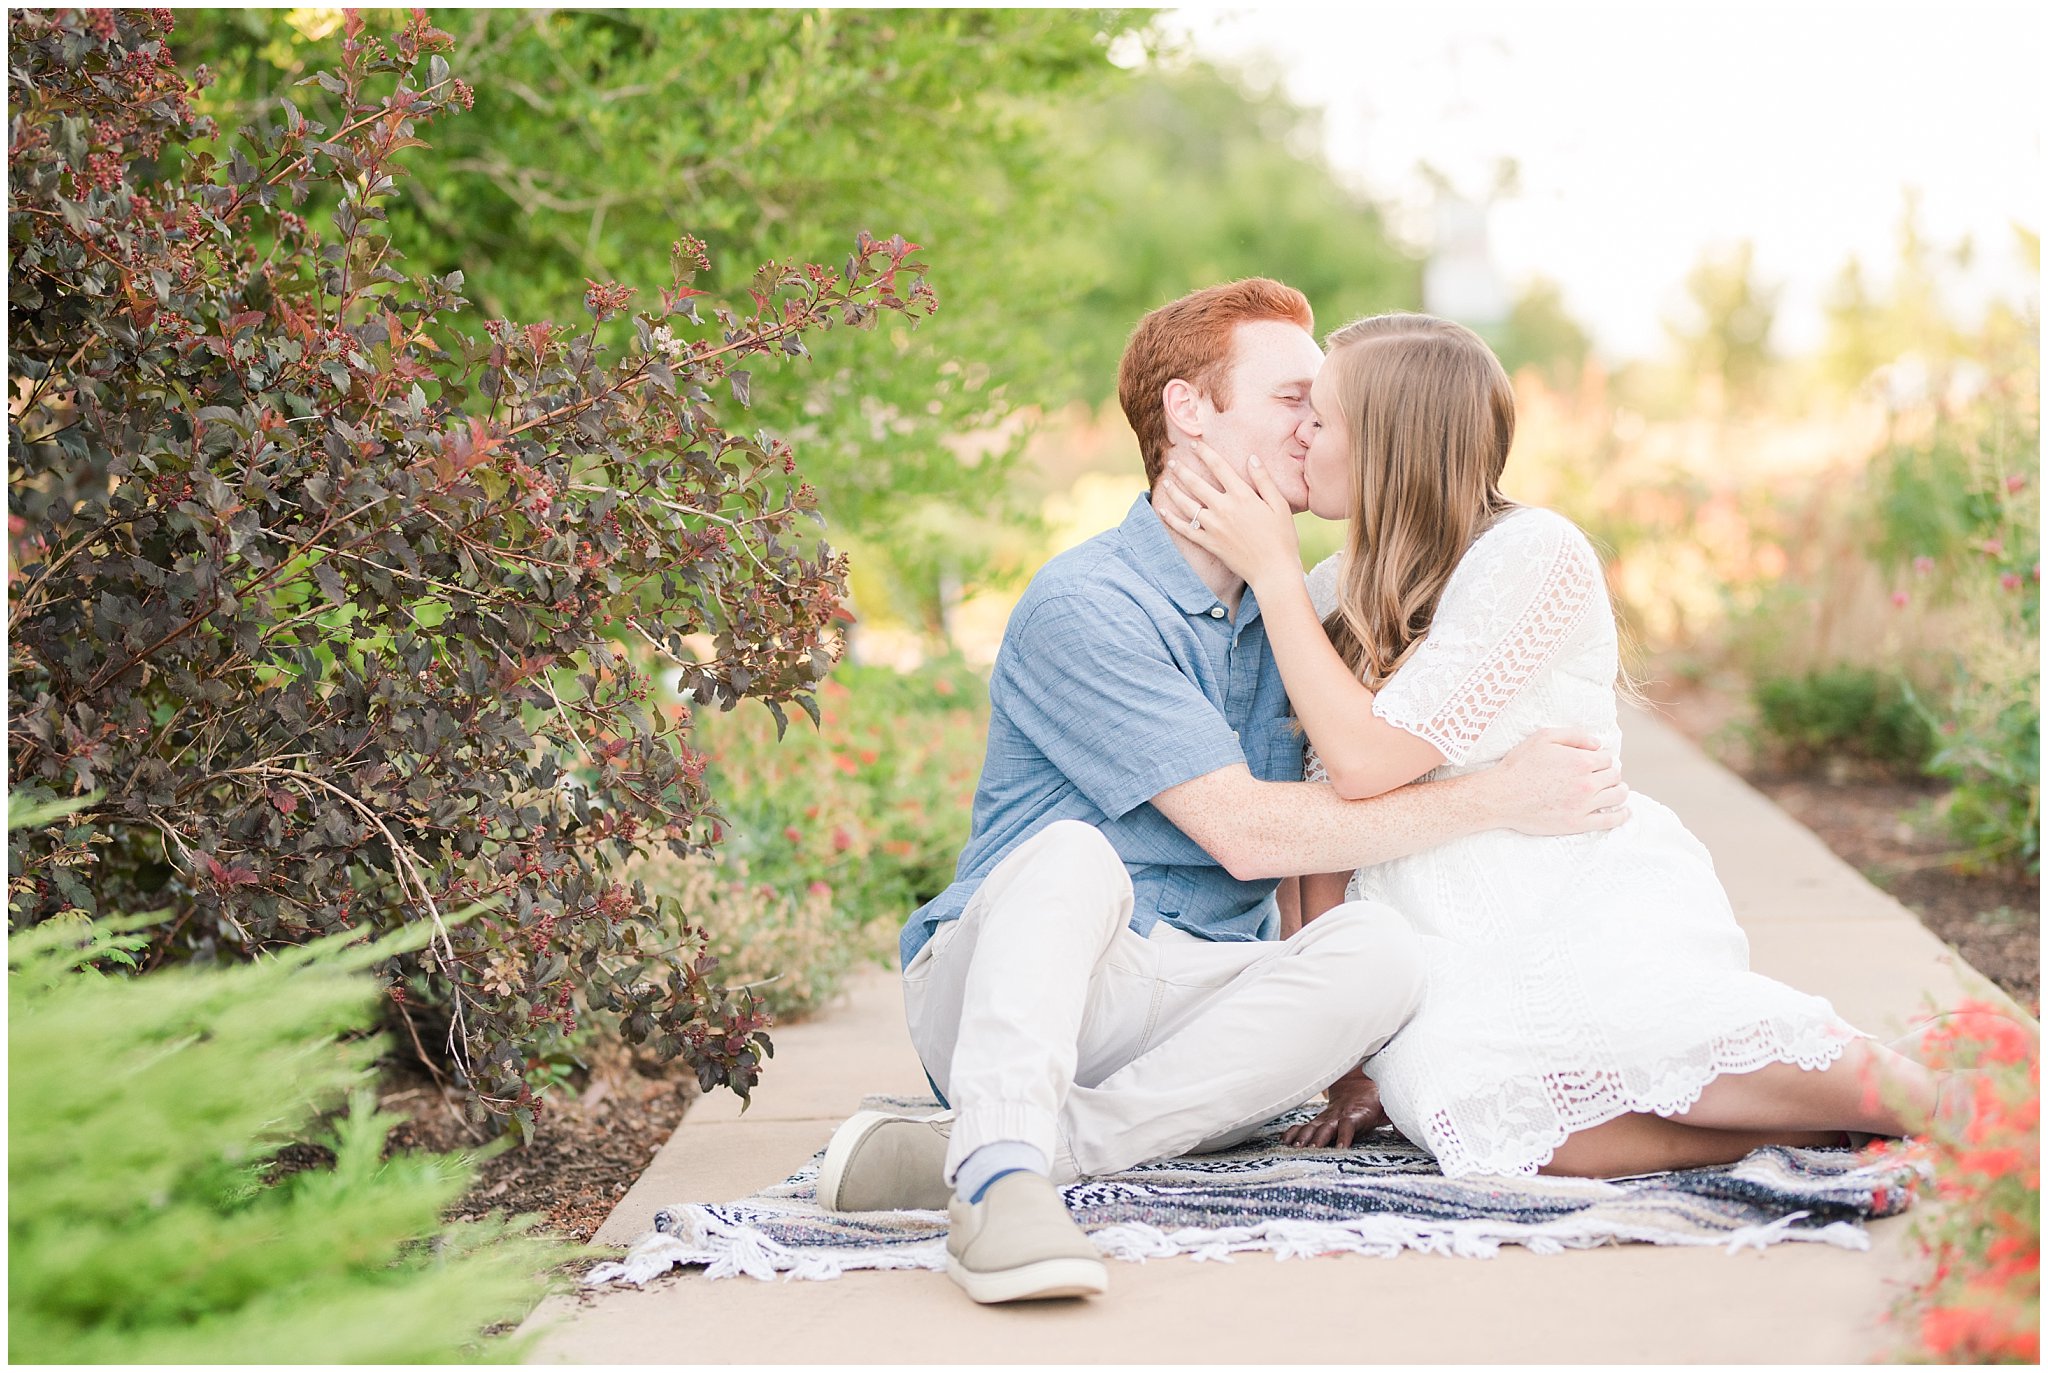 Couple wearing a white lace dress and light blue shirt during candid engagement photos in a Utah garden with flowers and a pond | Kaysville Botanical Garden Engagement | Utah Engagement | Jessie and Dallin Photography